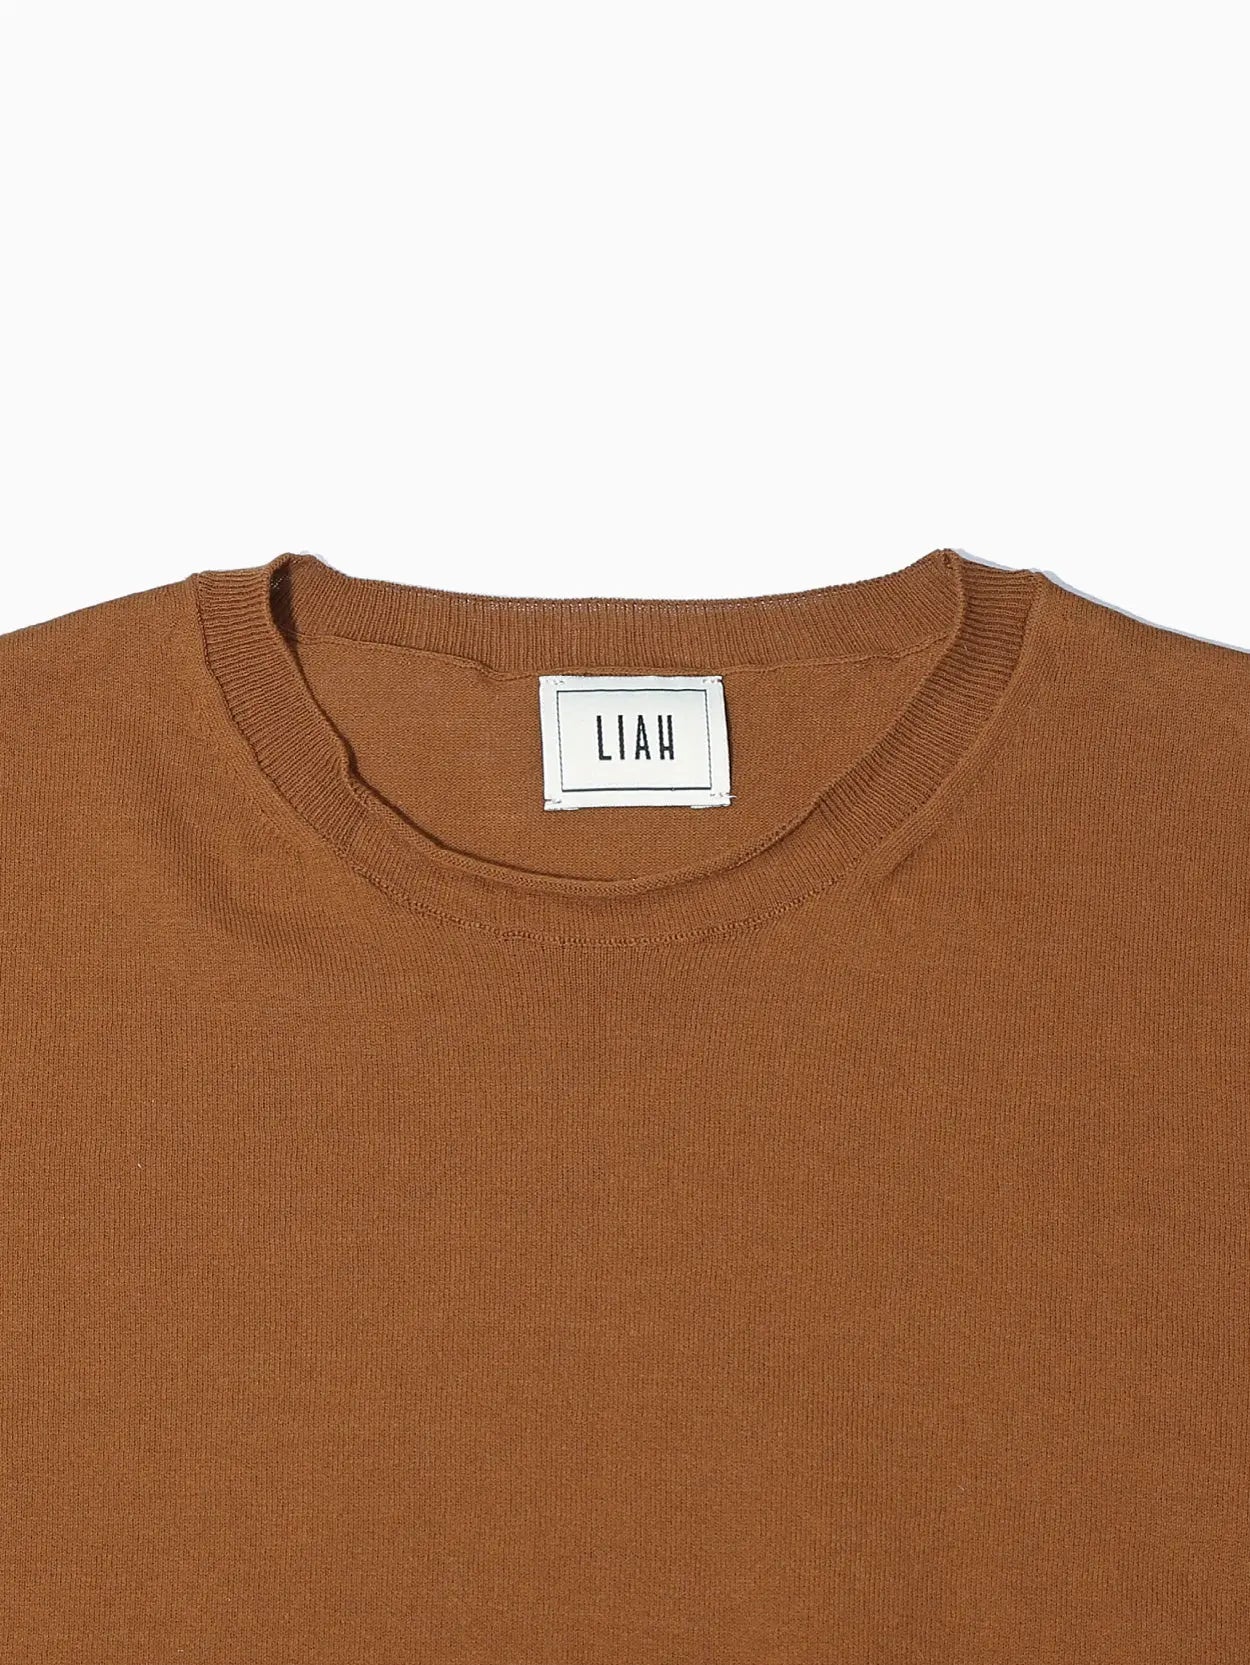 A Gia T-Shirt Caramel by Liah with a round neckline, displayed on a white background. The tag inside the collar appears to have text on it. The T-shirt, available at Bassalstore in Barcelona, looks simple and casual in design.